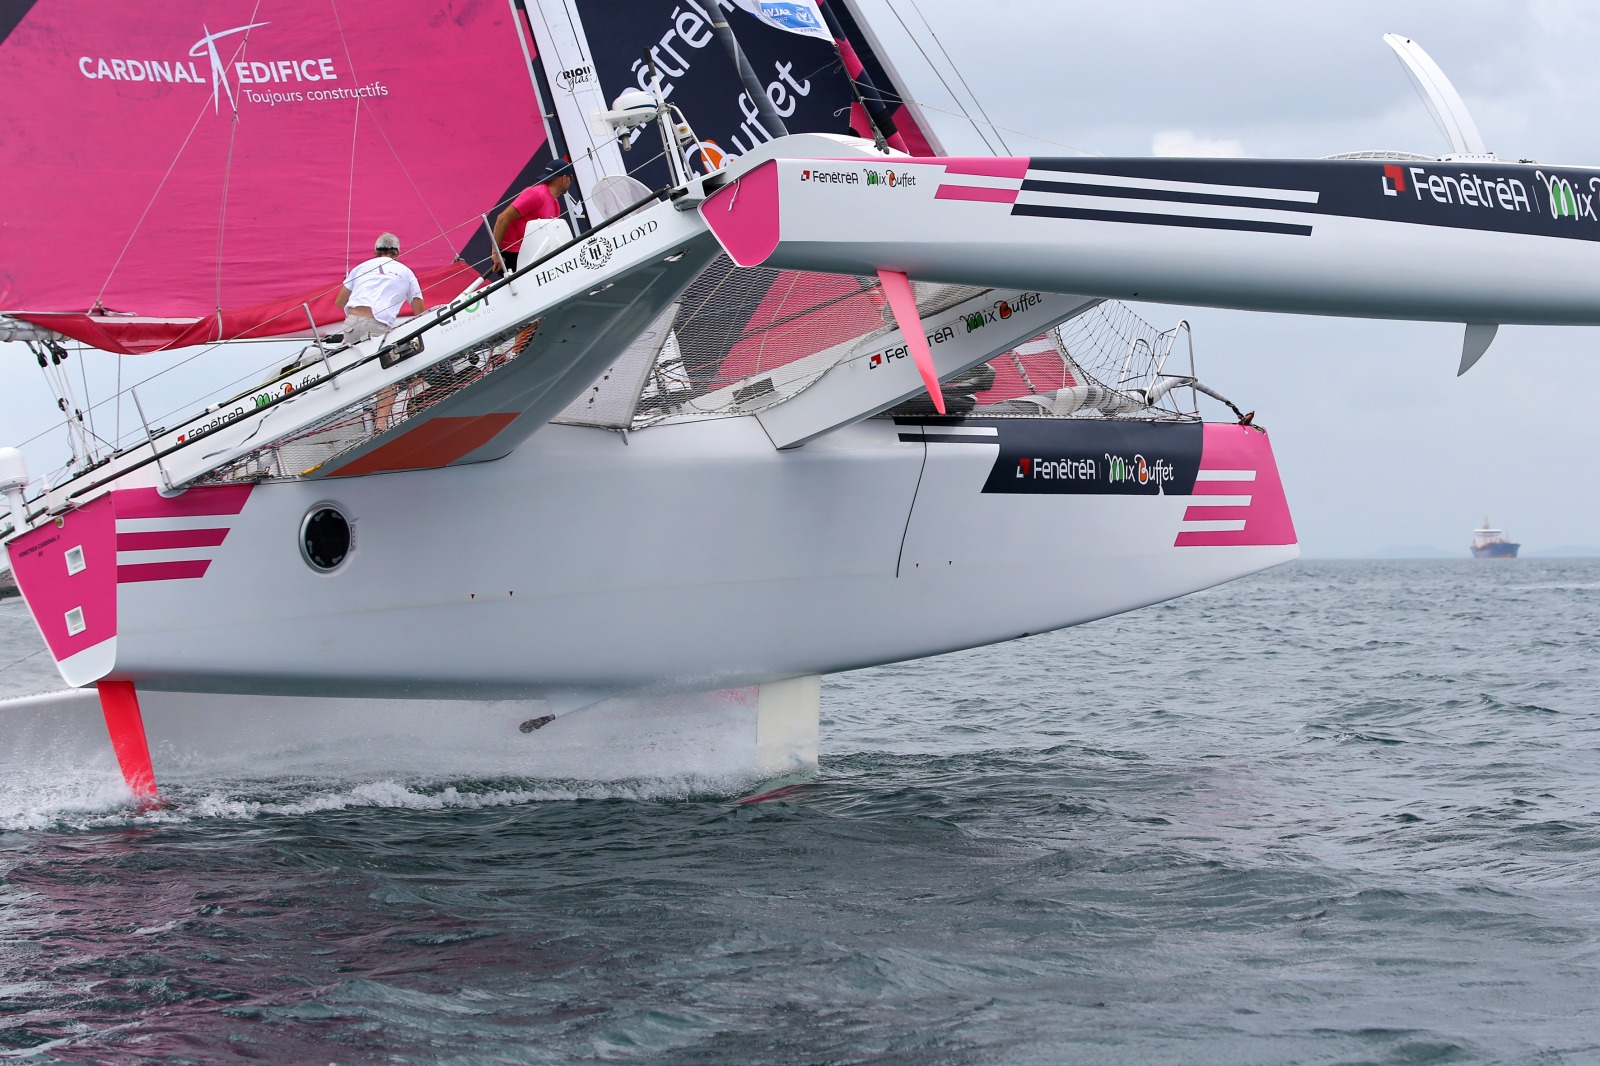  IMOCA Open 60, Class 40, Multi 50, Ultime  Transat Jacques Vabre  Le Havre FRA  Day 12, the Swiss